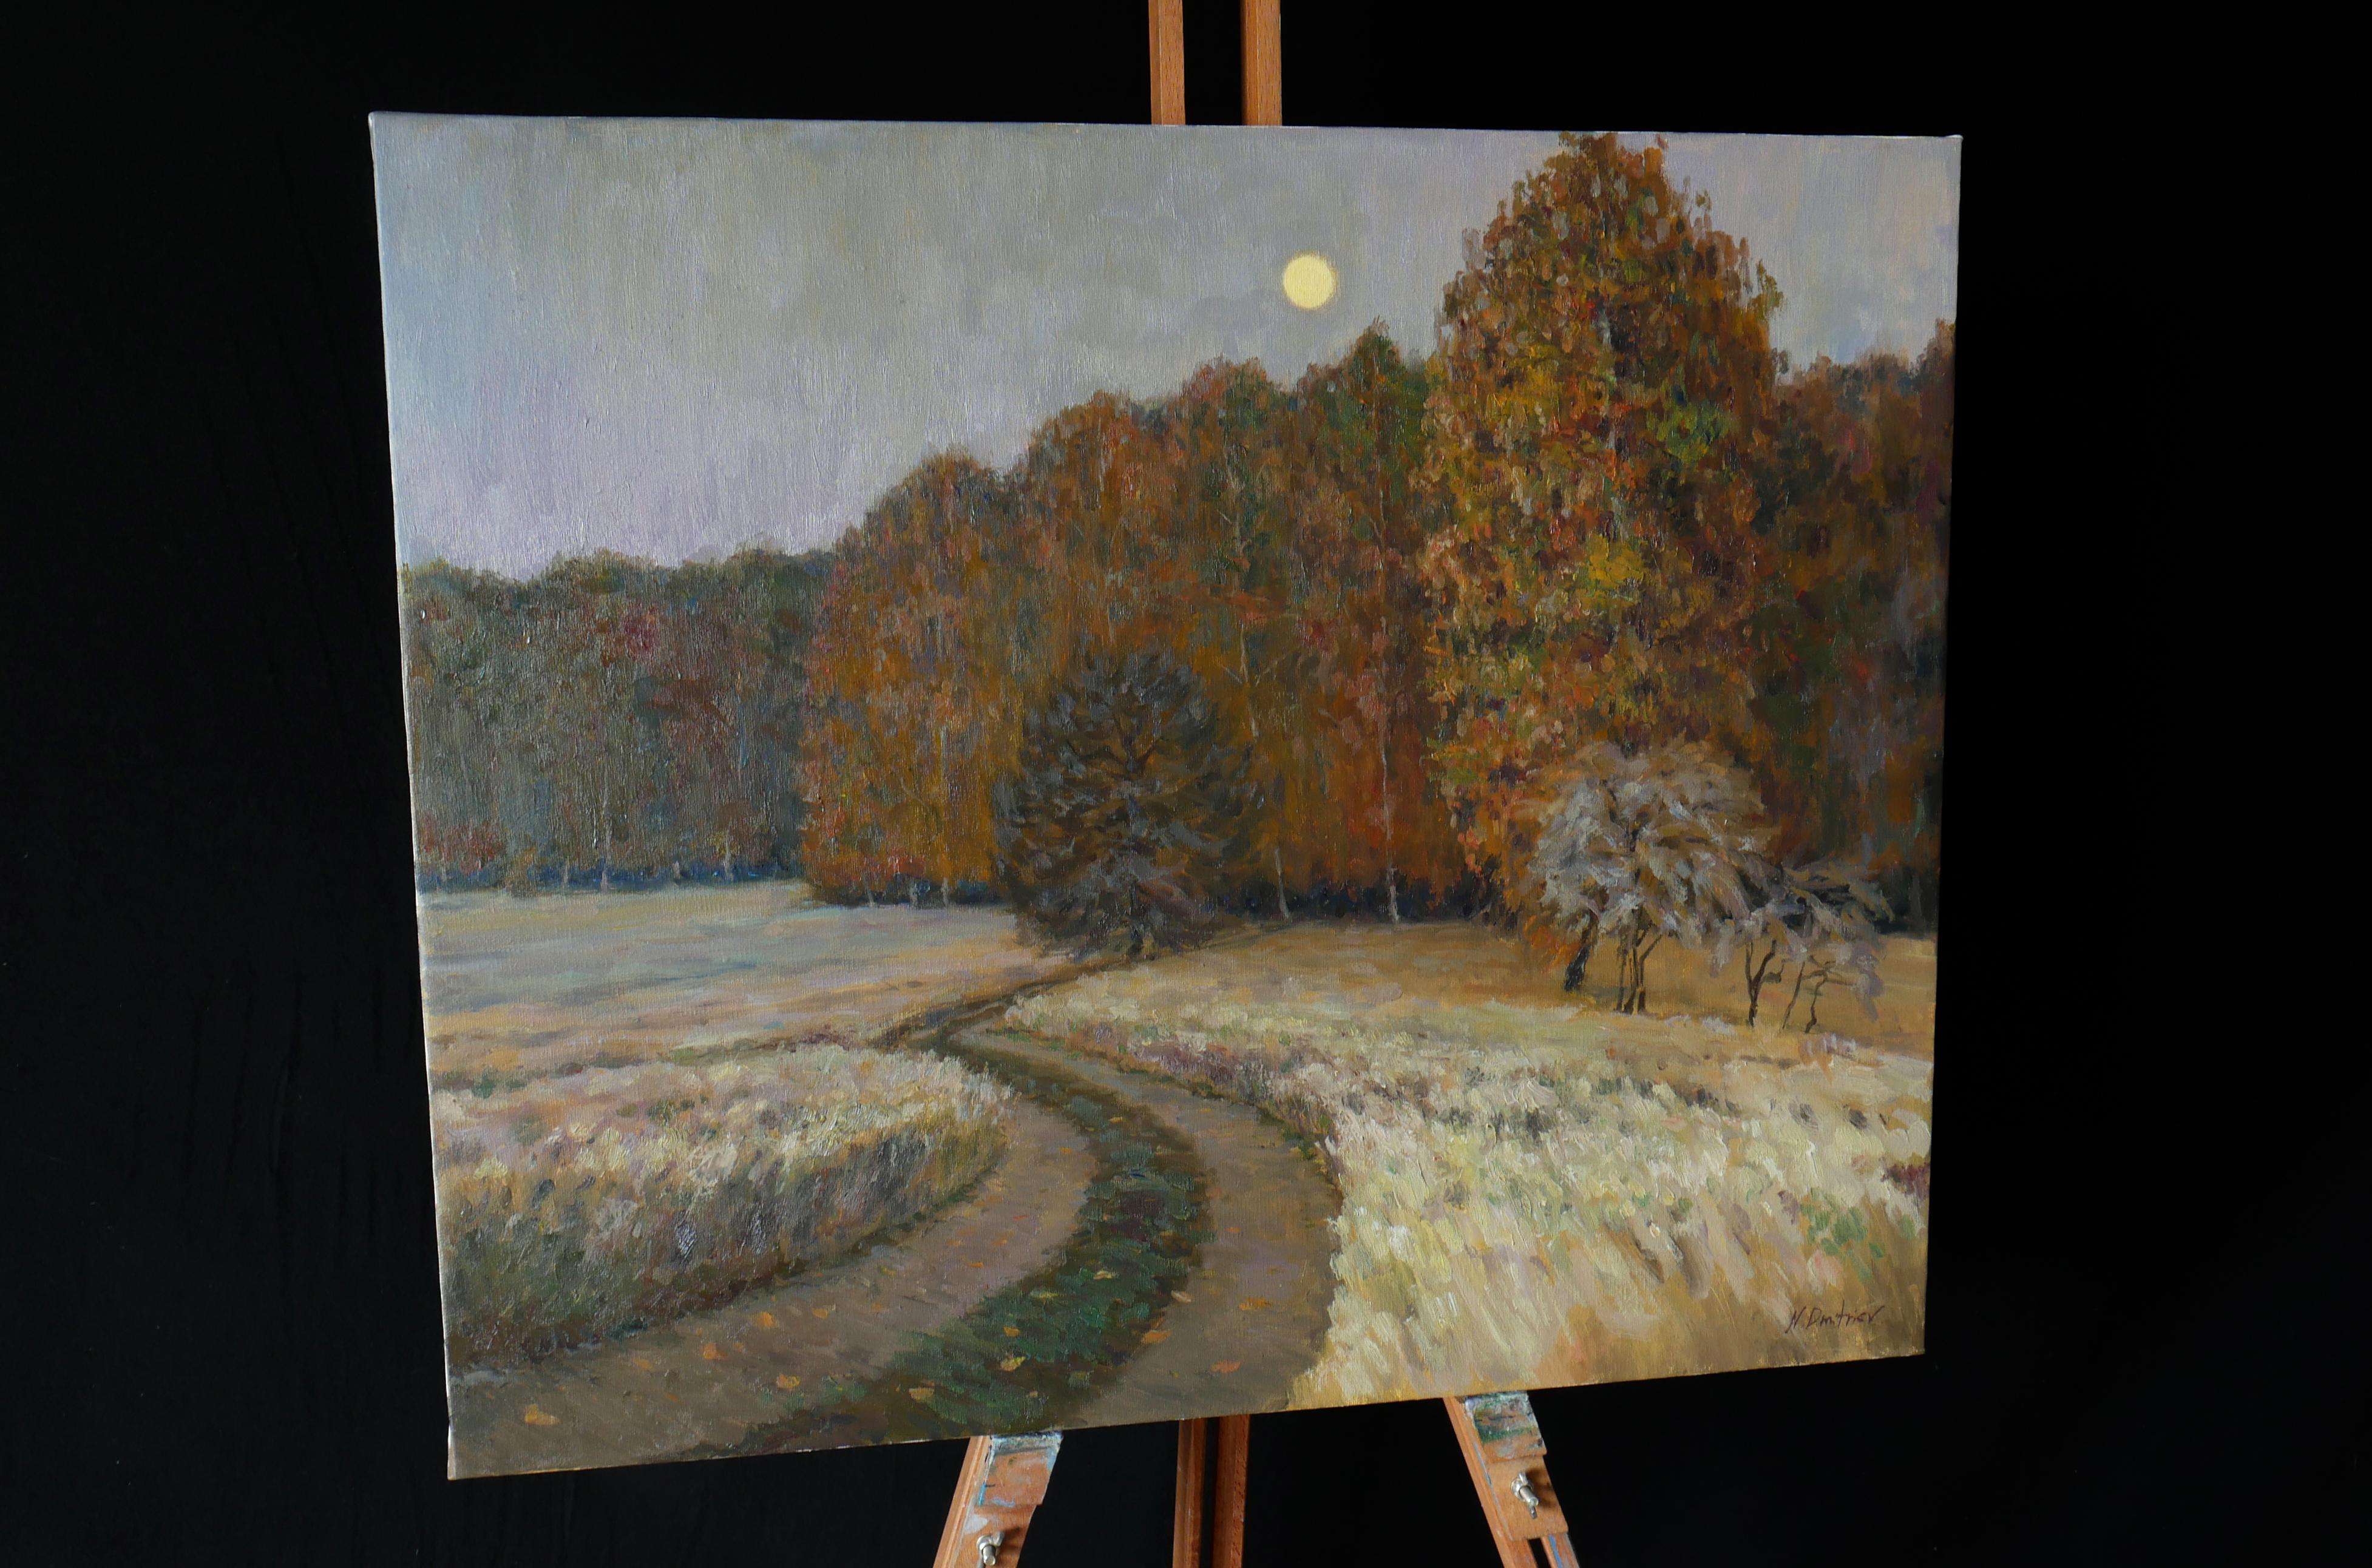 Moon Rise - autumn landscape painting - Painting by Nikolay Dmitriev